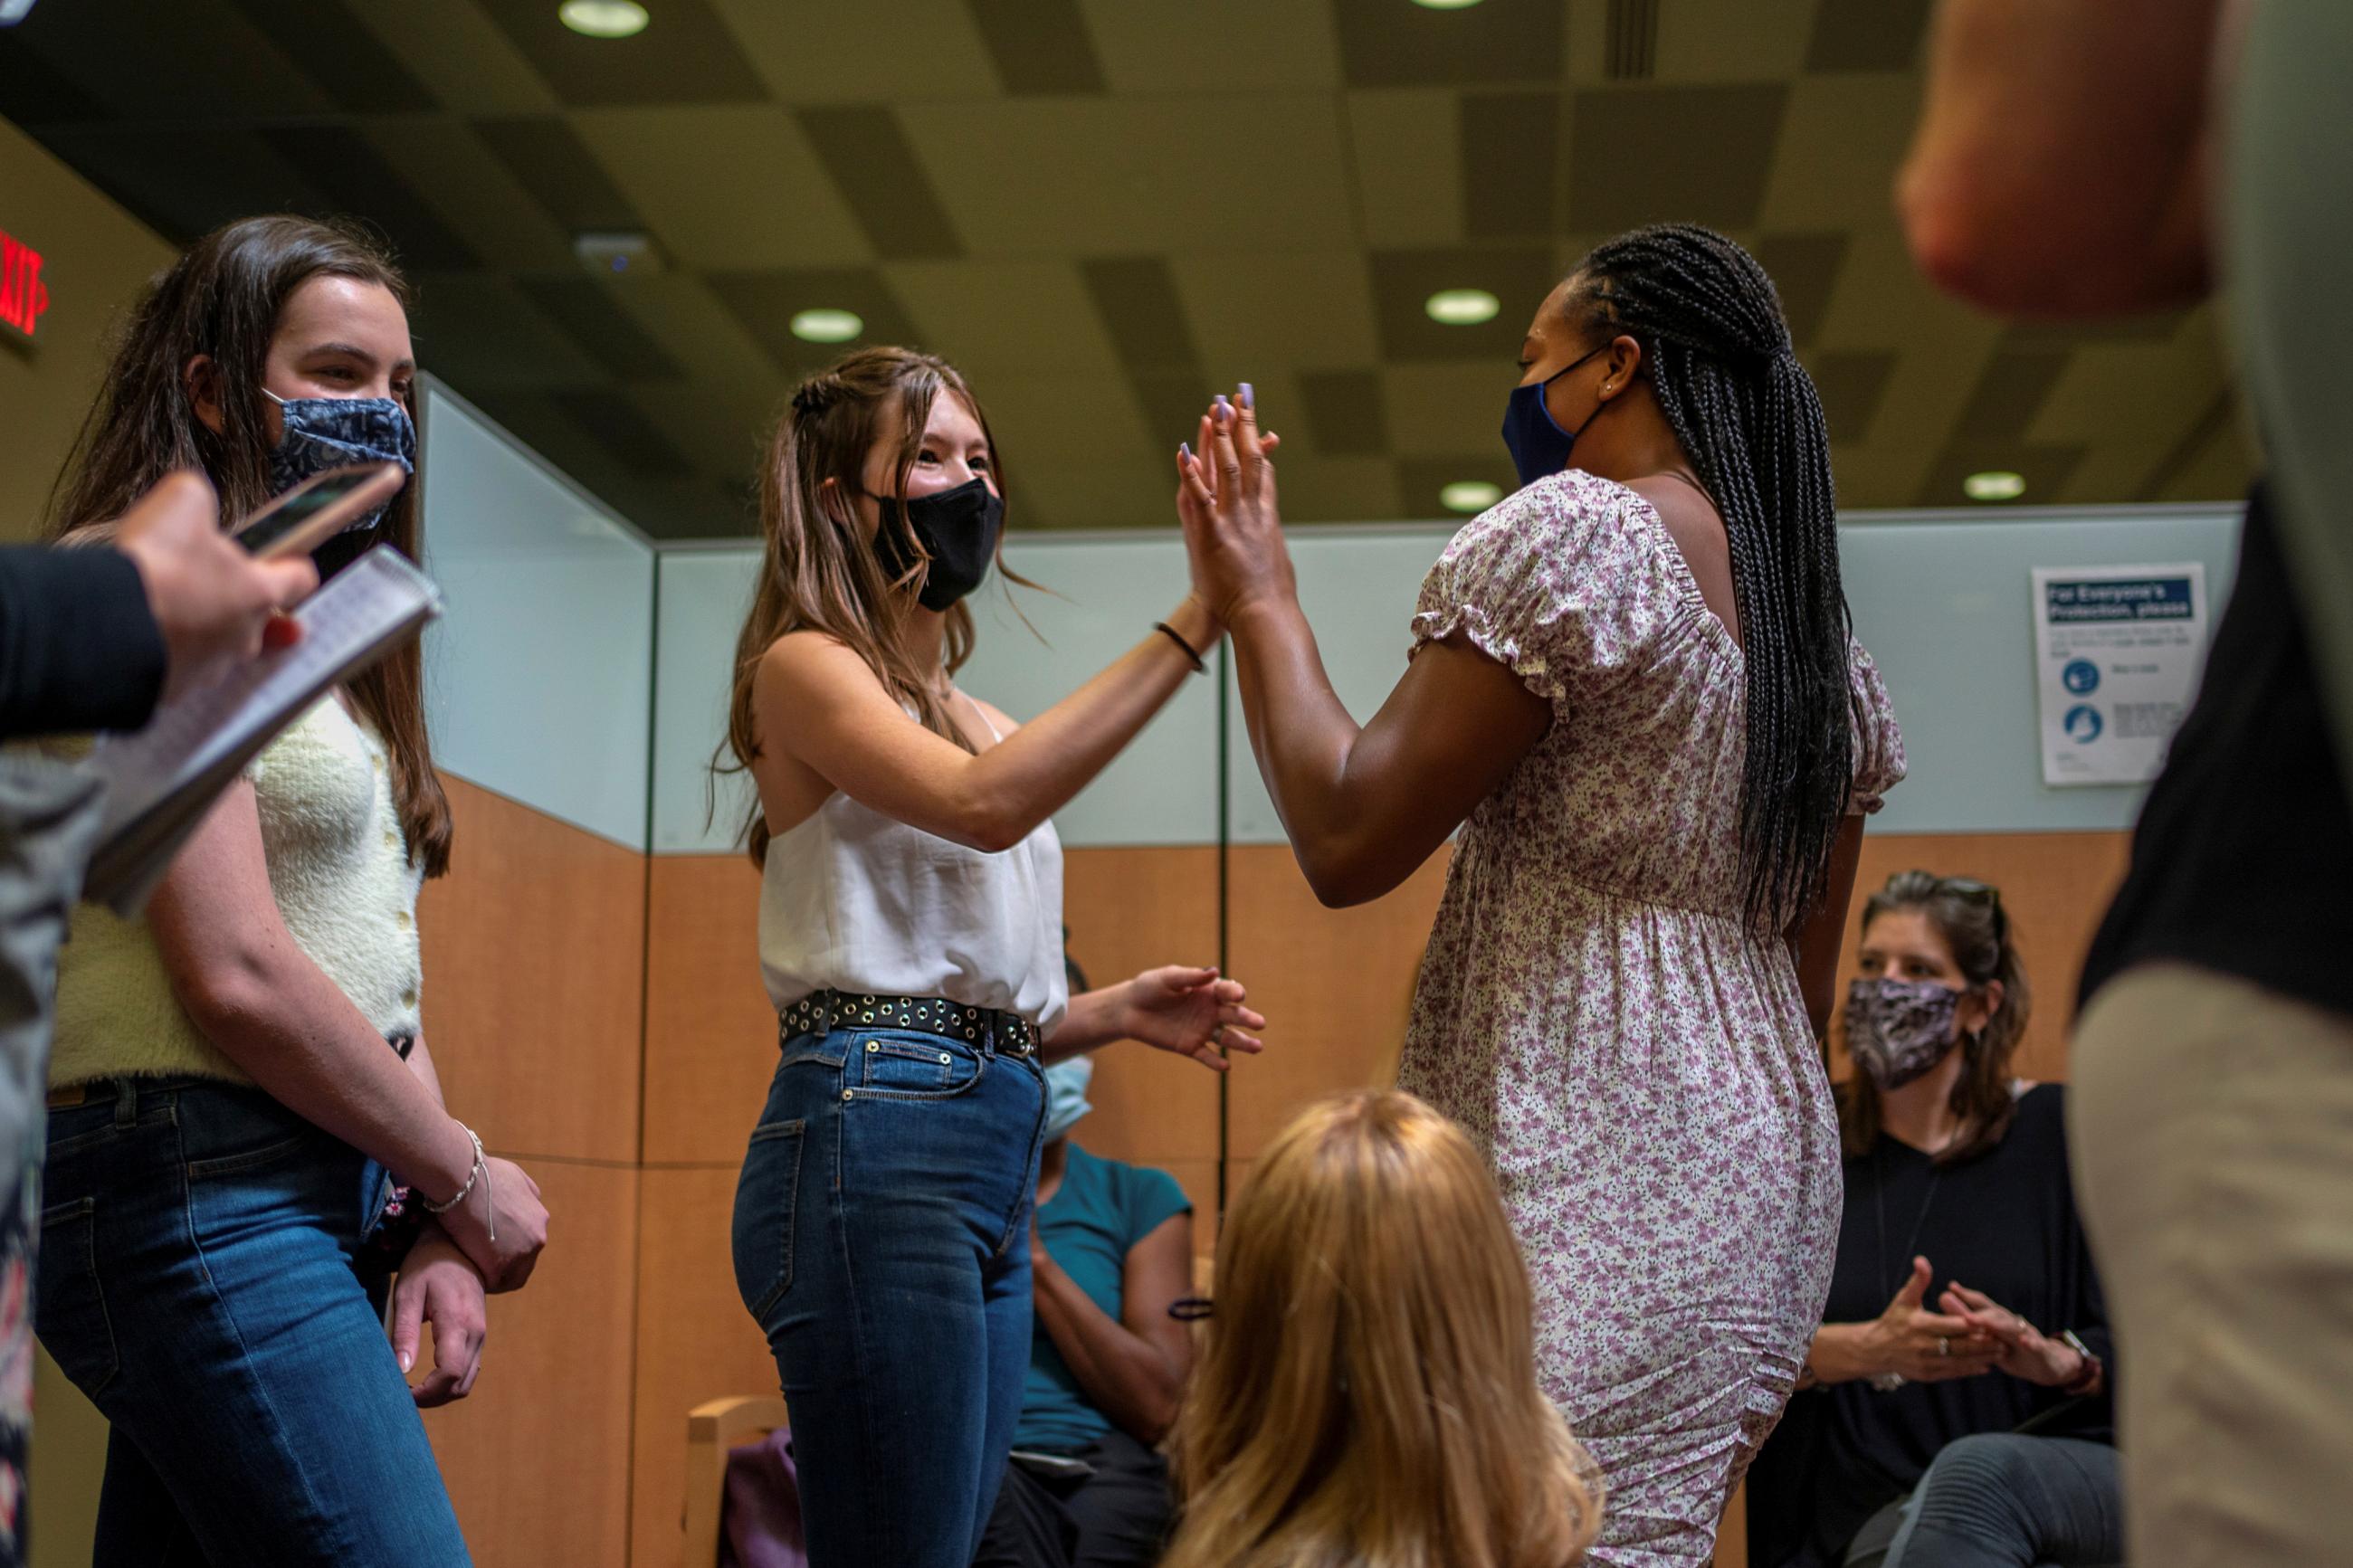 Ava Kreutziger, 14, gives Croix Hill, 15, a high five after Croix received her first dose of the COVID-19 vaccine at the Ochsner Center for Primary Care and Wellness, in New Orleans, Louisiana, May 13, 2021. 